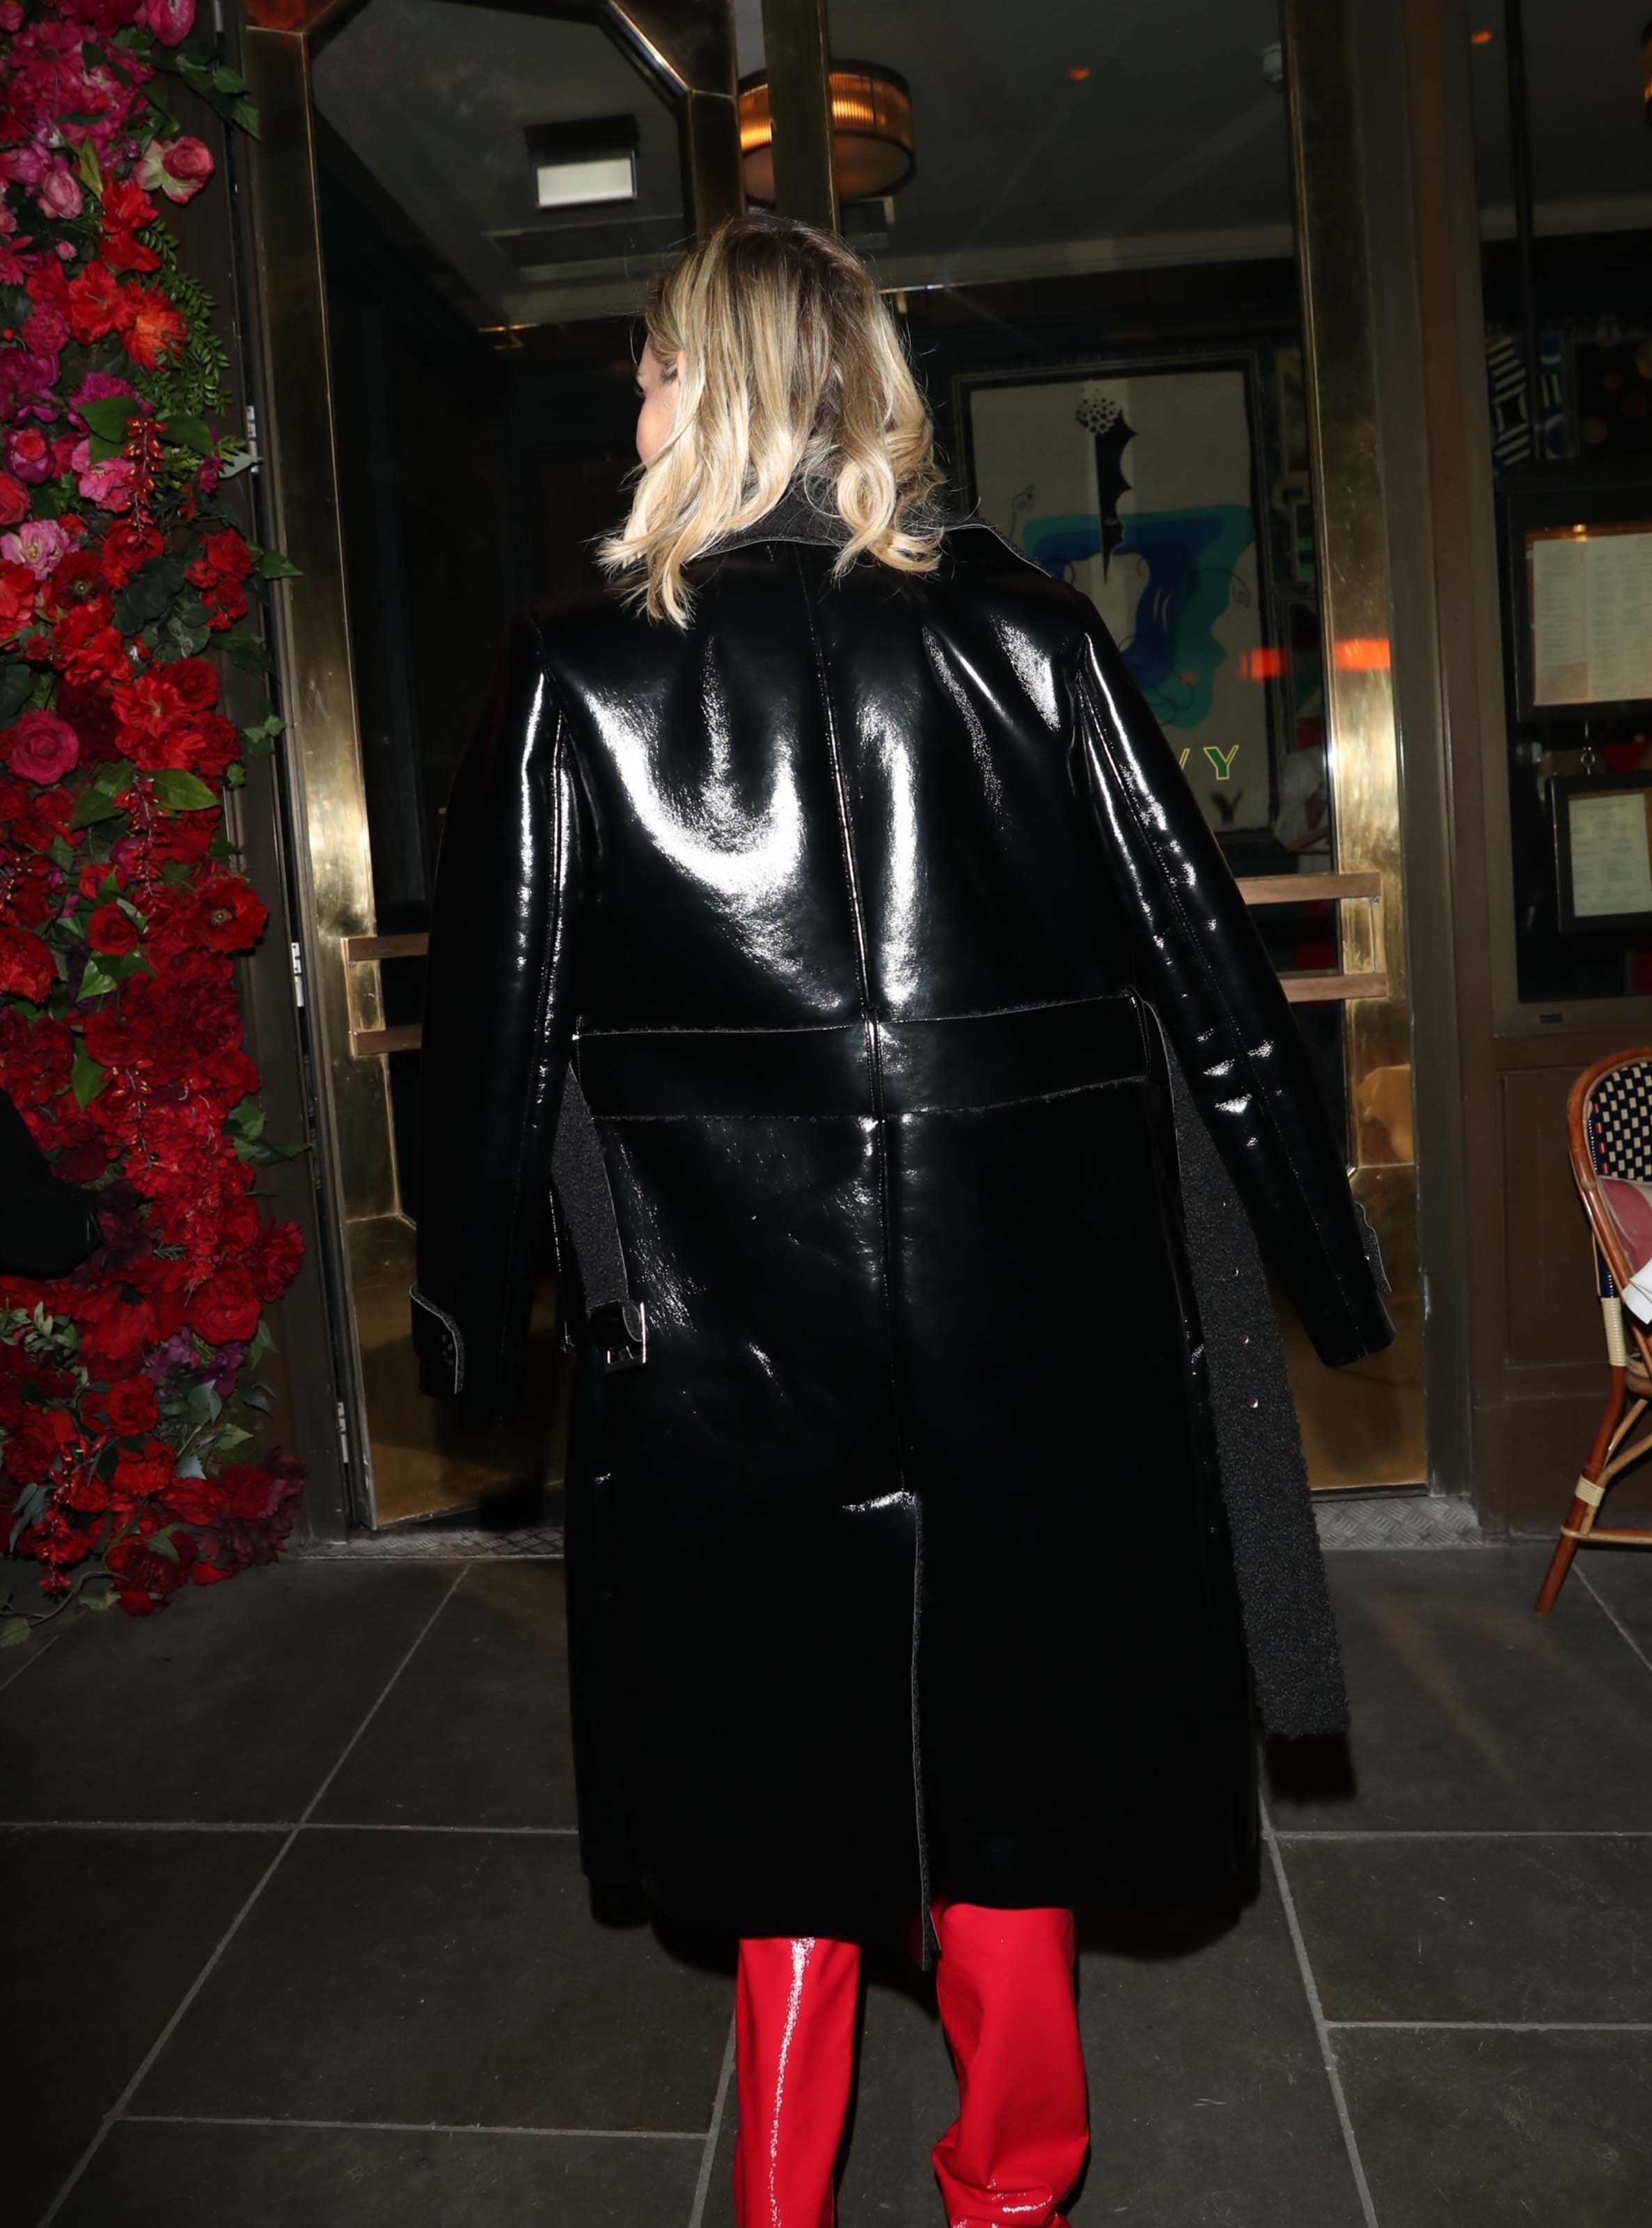 Ashley Roberts looks hot in red trouser celebrates valentine with friends